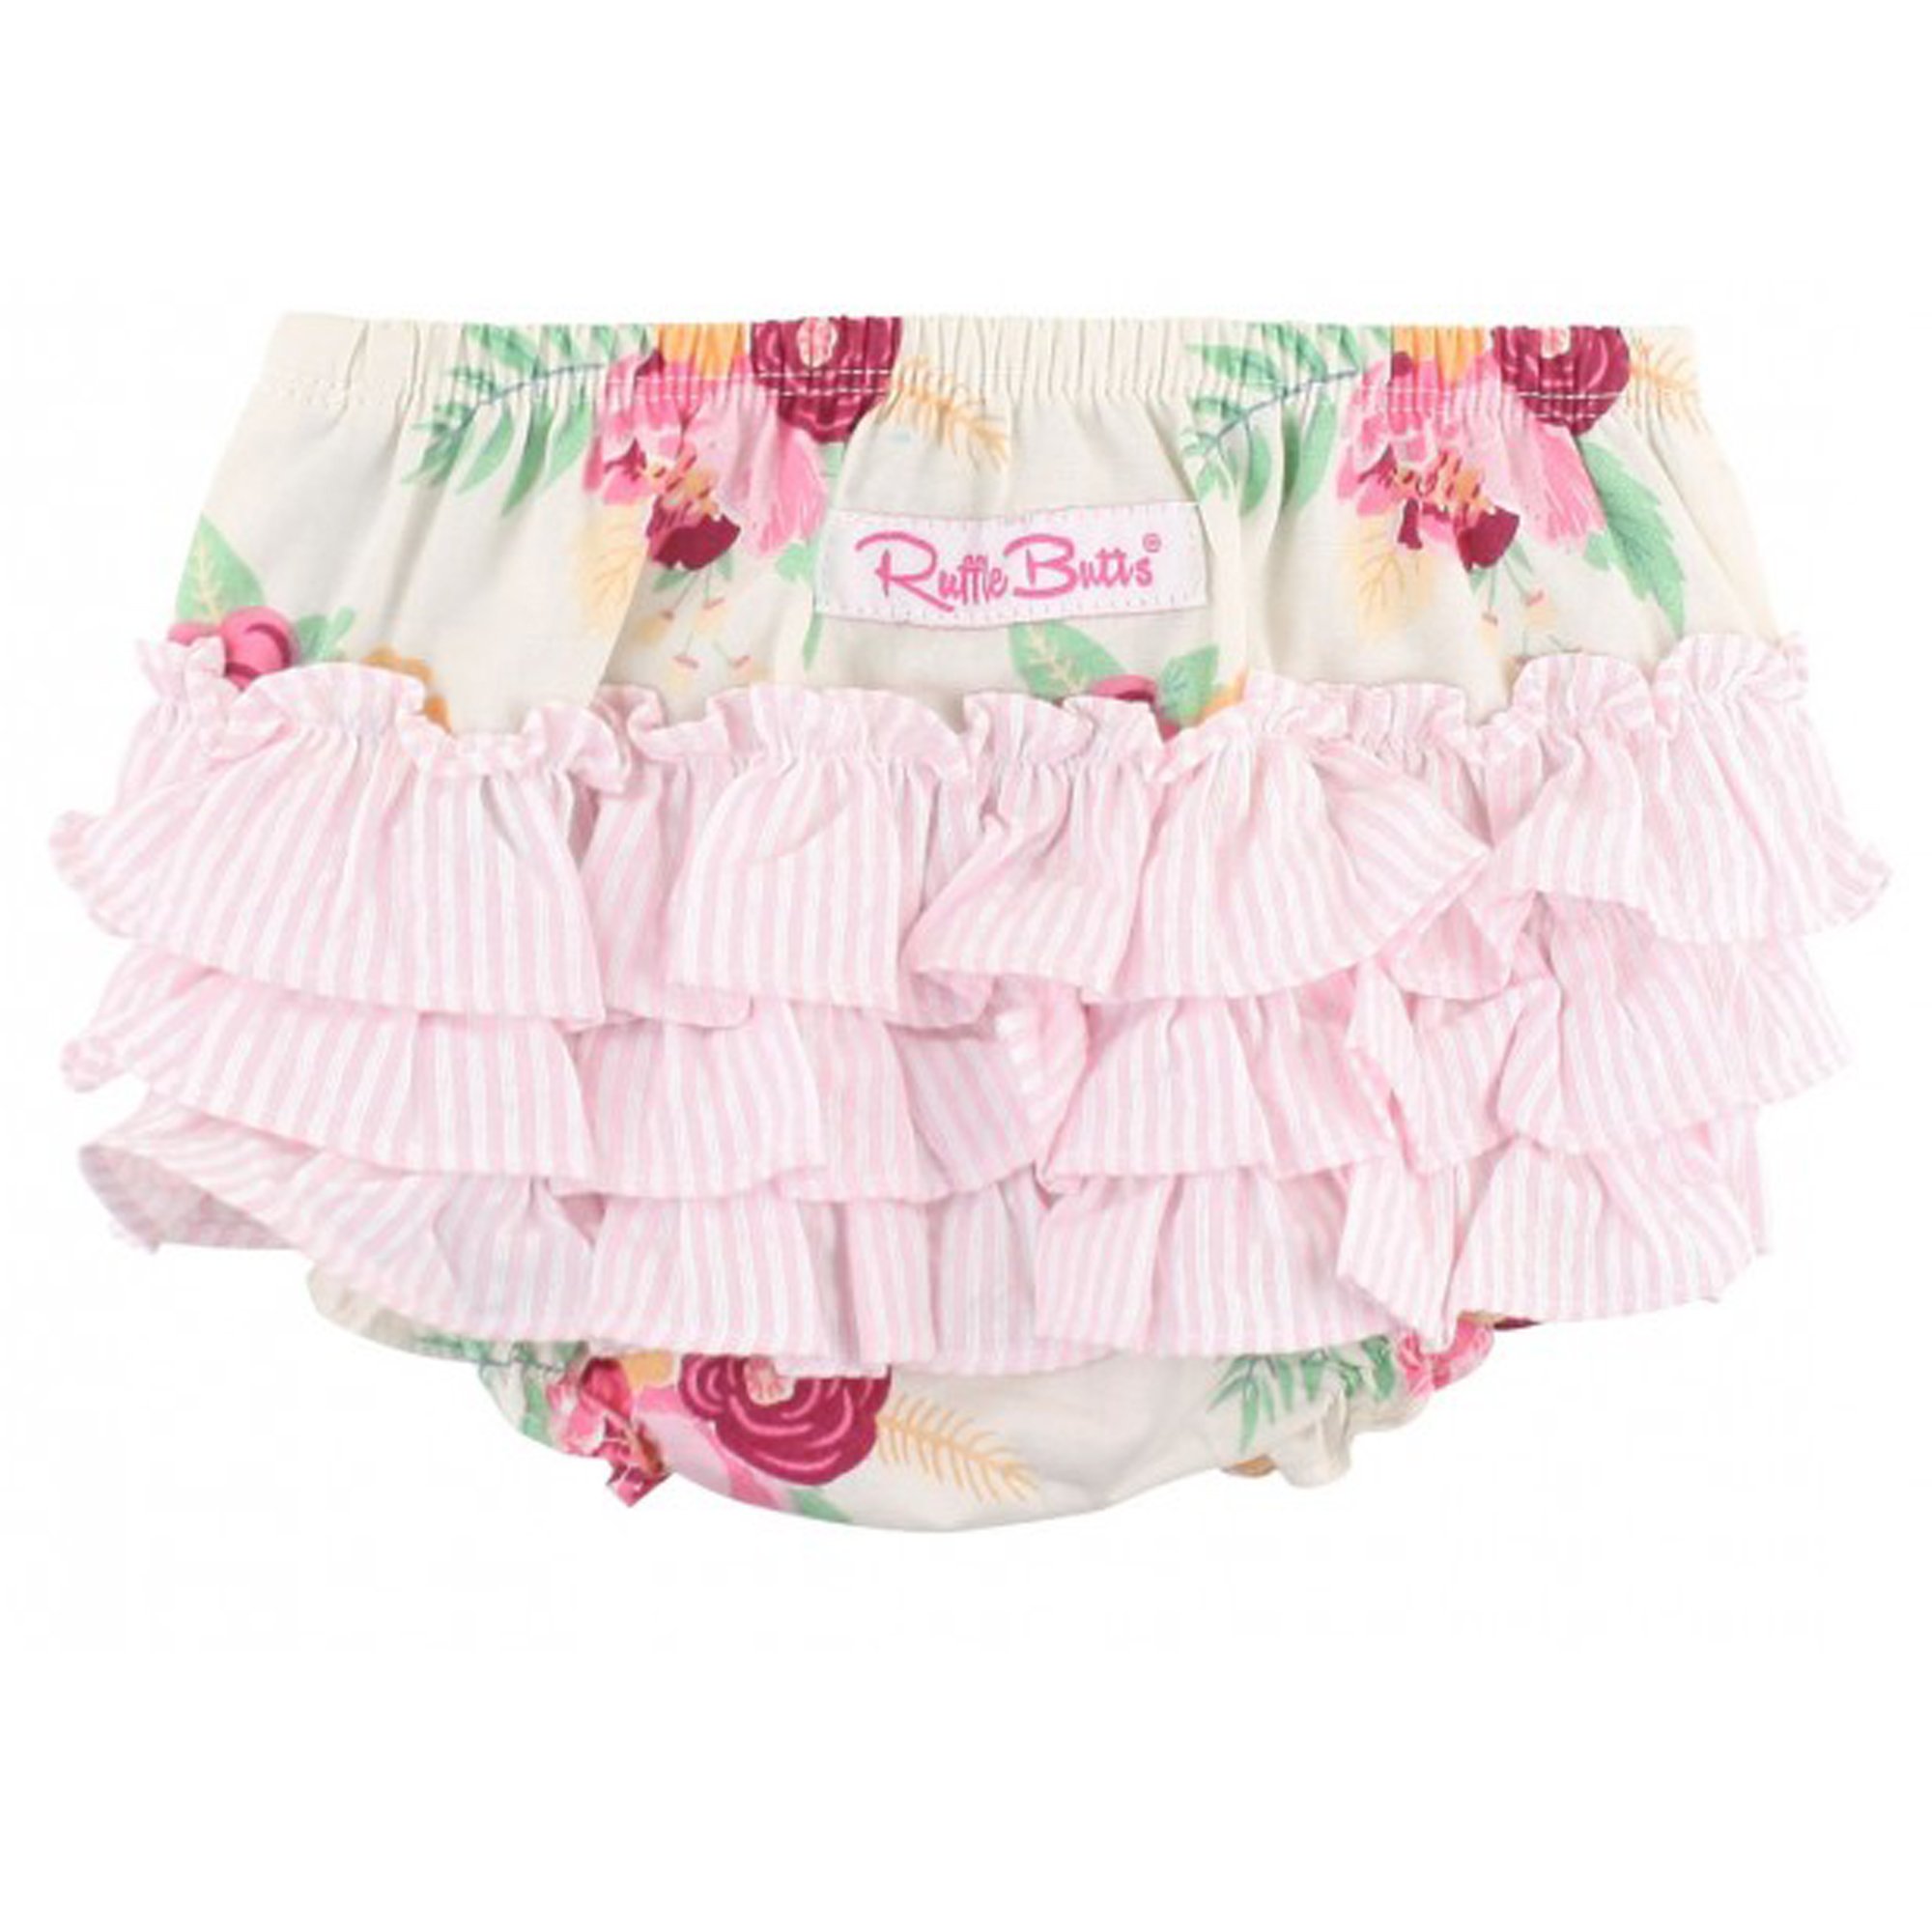 Ruffle Butts Darling Bouquets Diaper Cover for Baby Girls and Toddlers